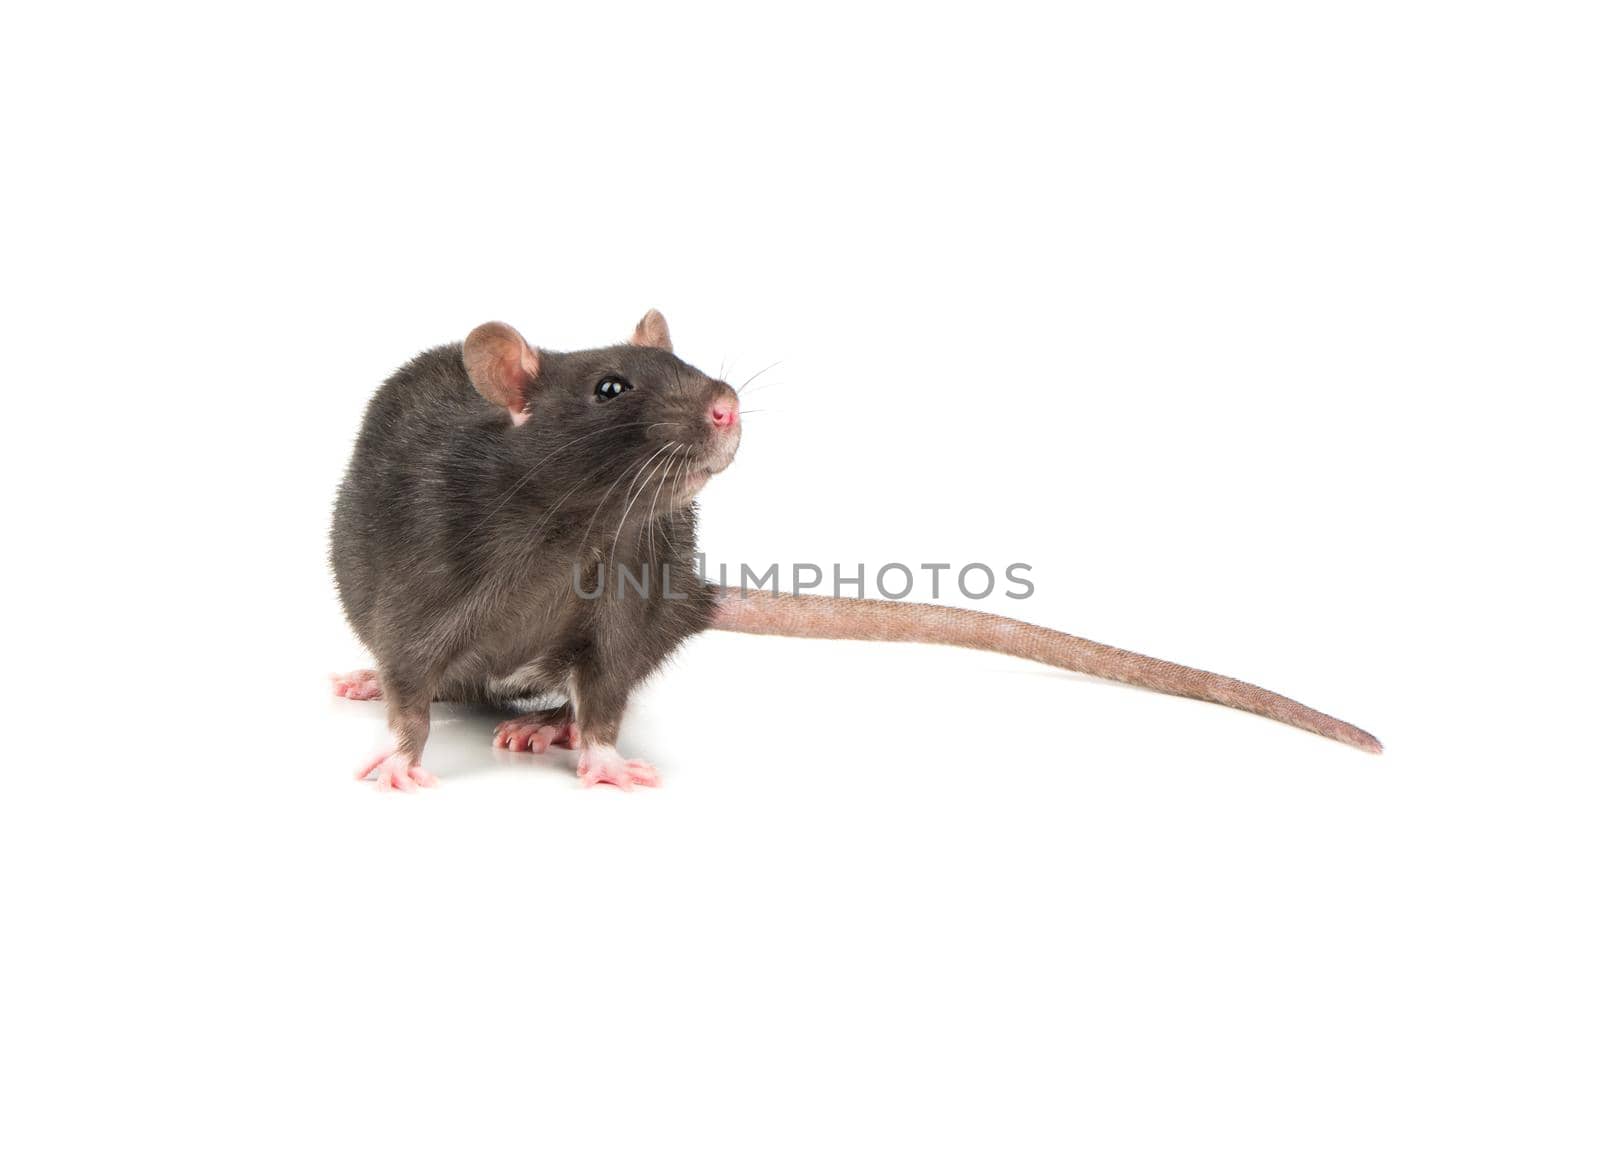 Rat sniffs the air on a white background